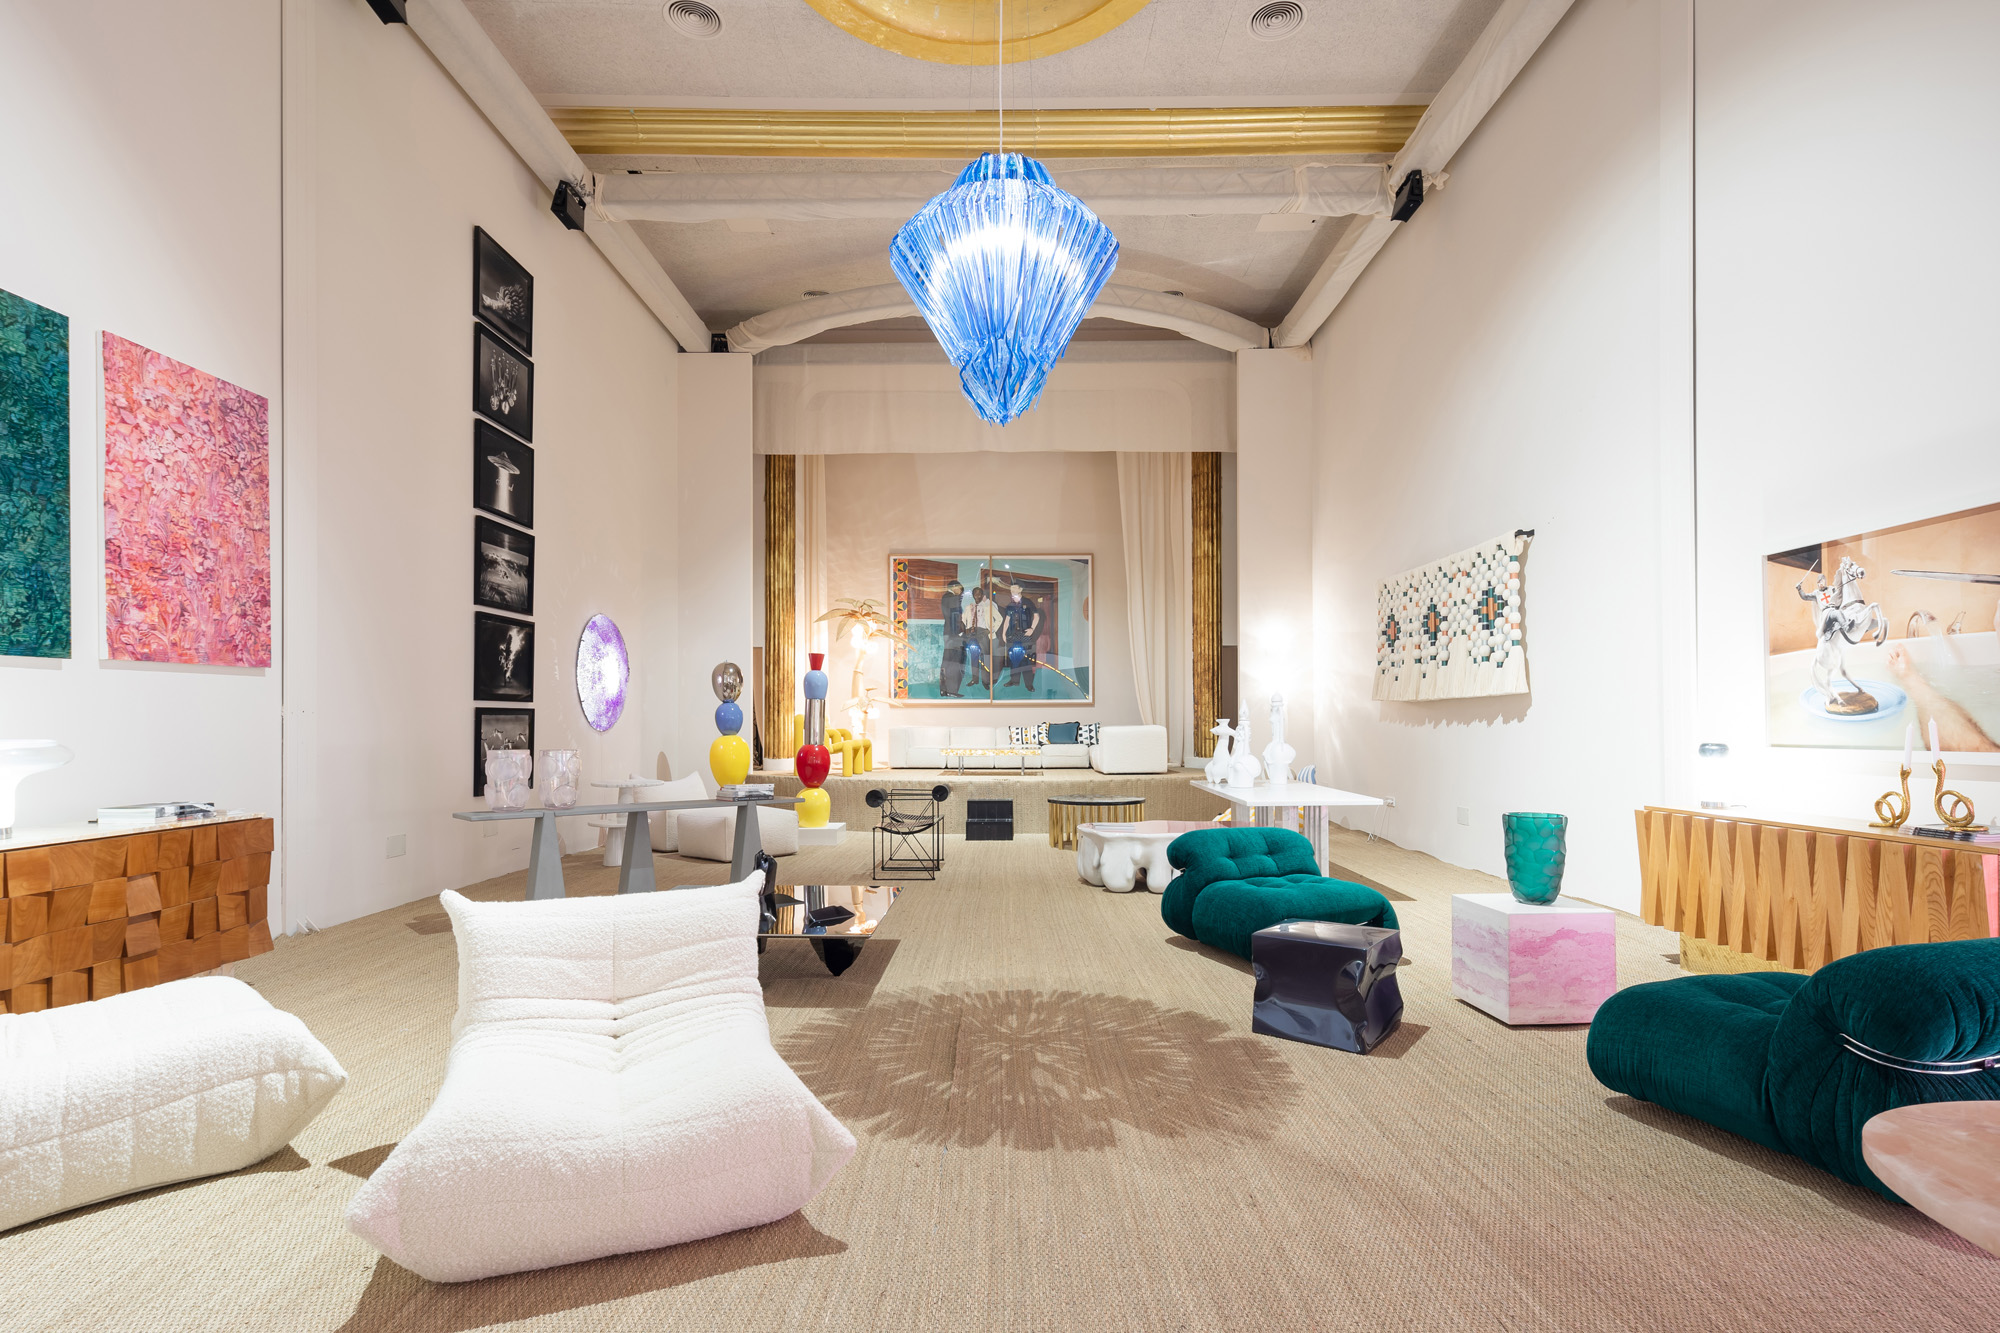 A design exhibition in an old cinema with bright colours and retro furniture